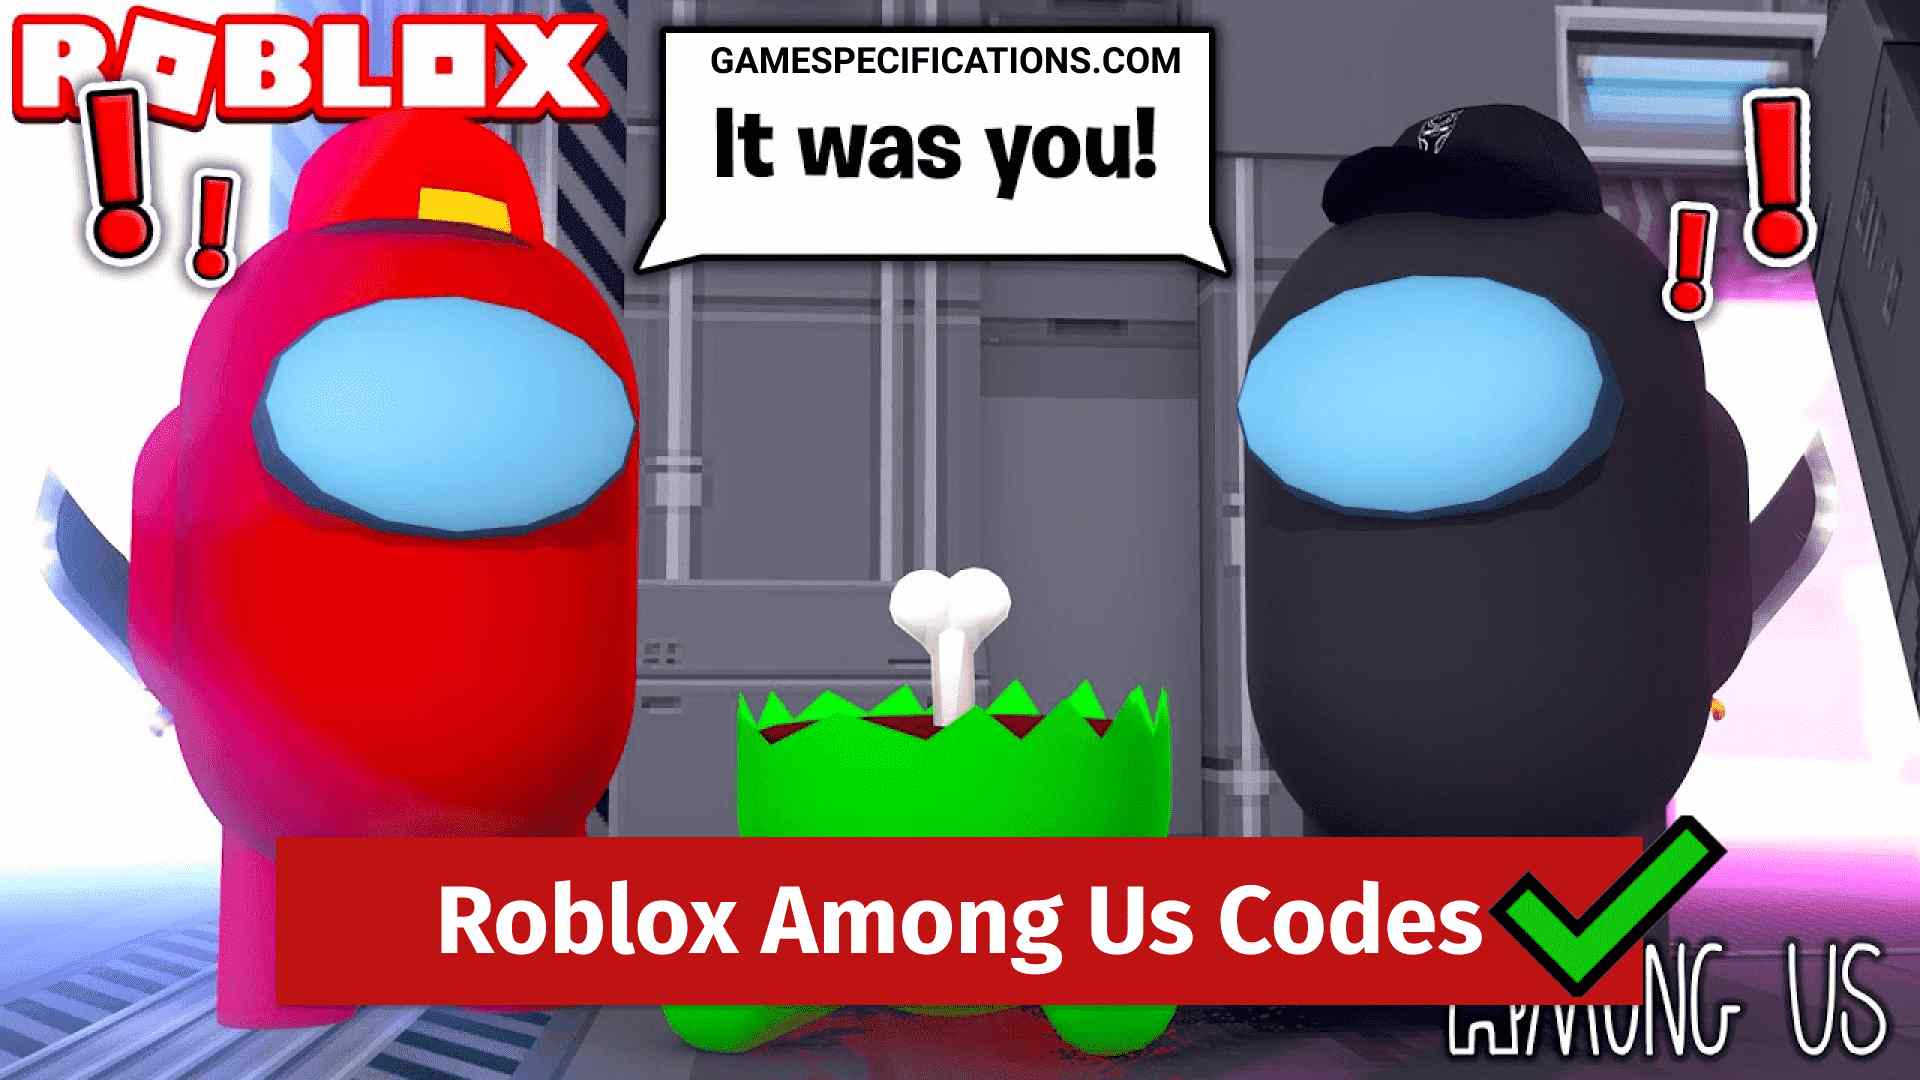 3 Roblox Among Us Codes For Free Pets July 2021 Game Specifications - roblox among us codes